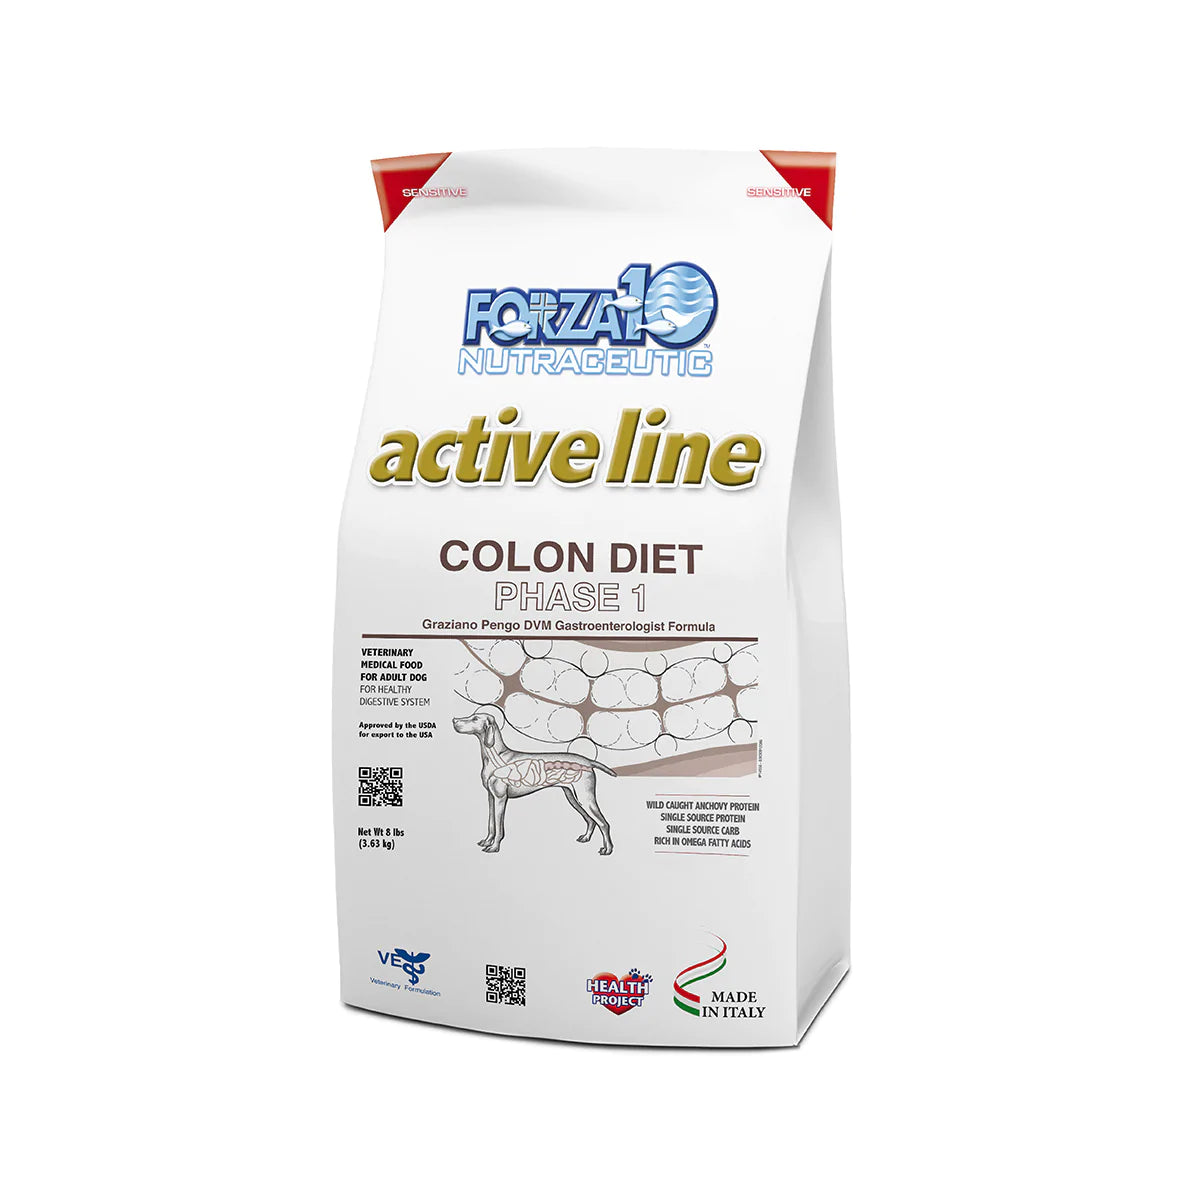 FORZA10 NUTRACEUTIC ACTIVE COLON DIET PHASE 1 DRY DOG FOOD